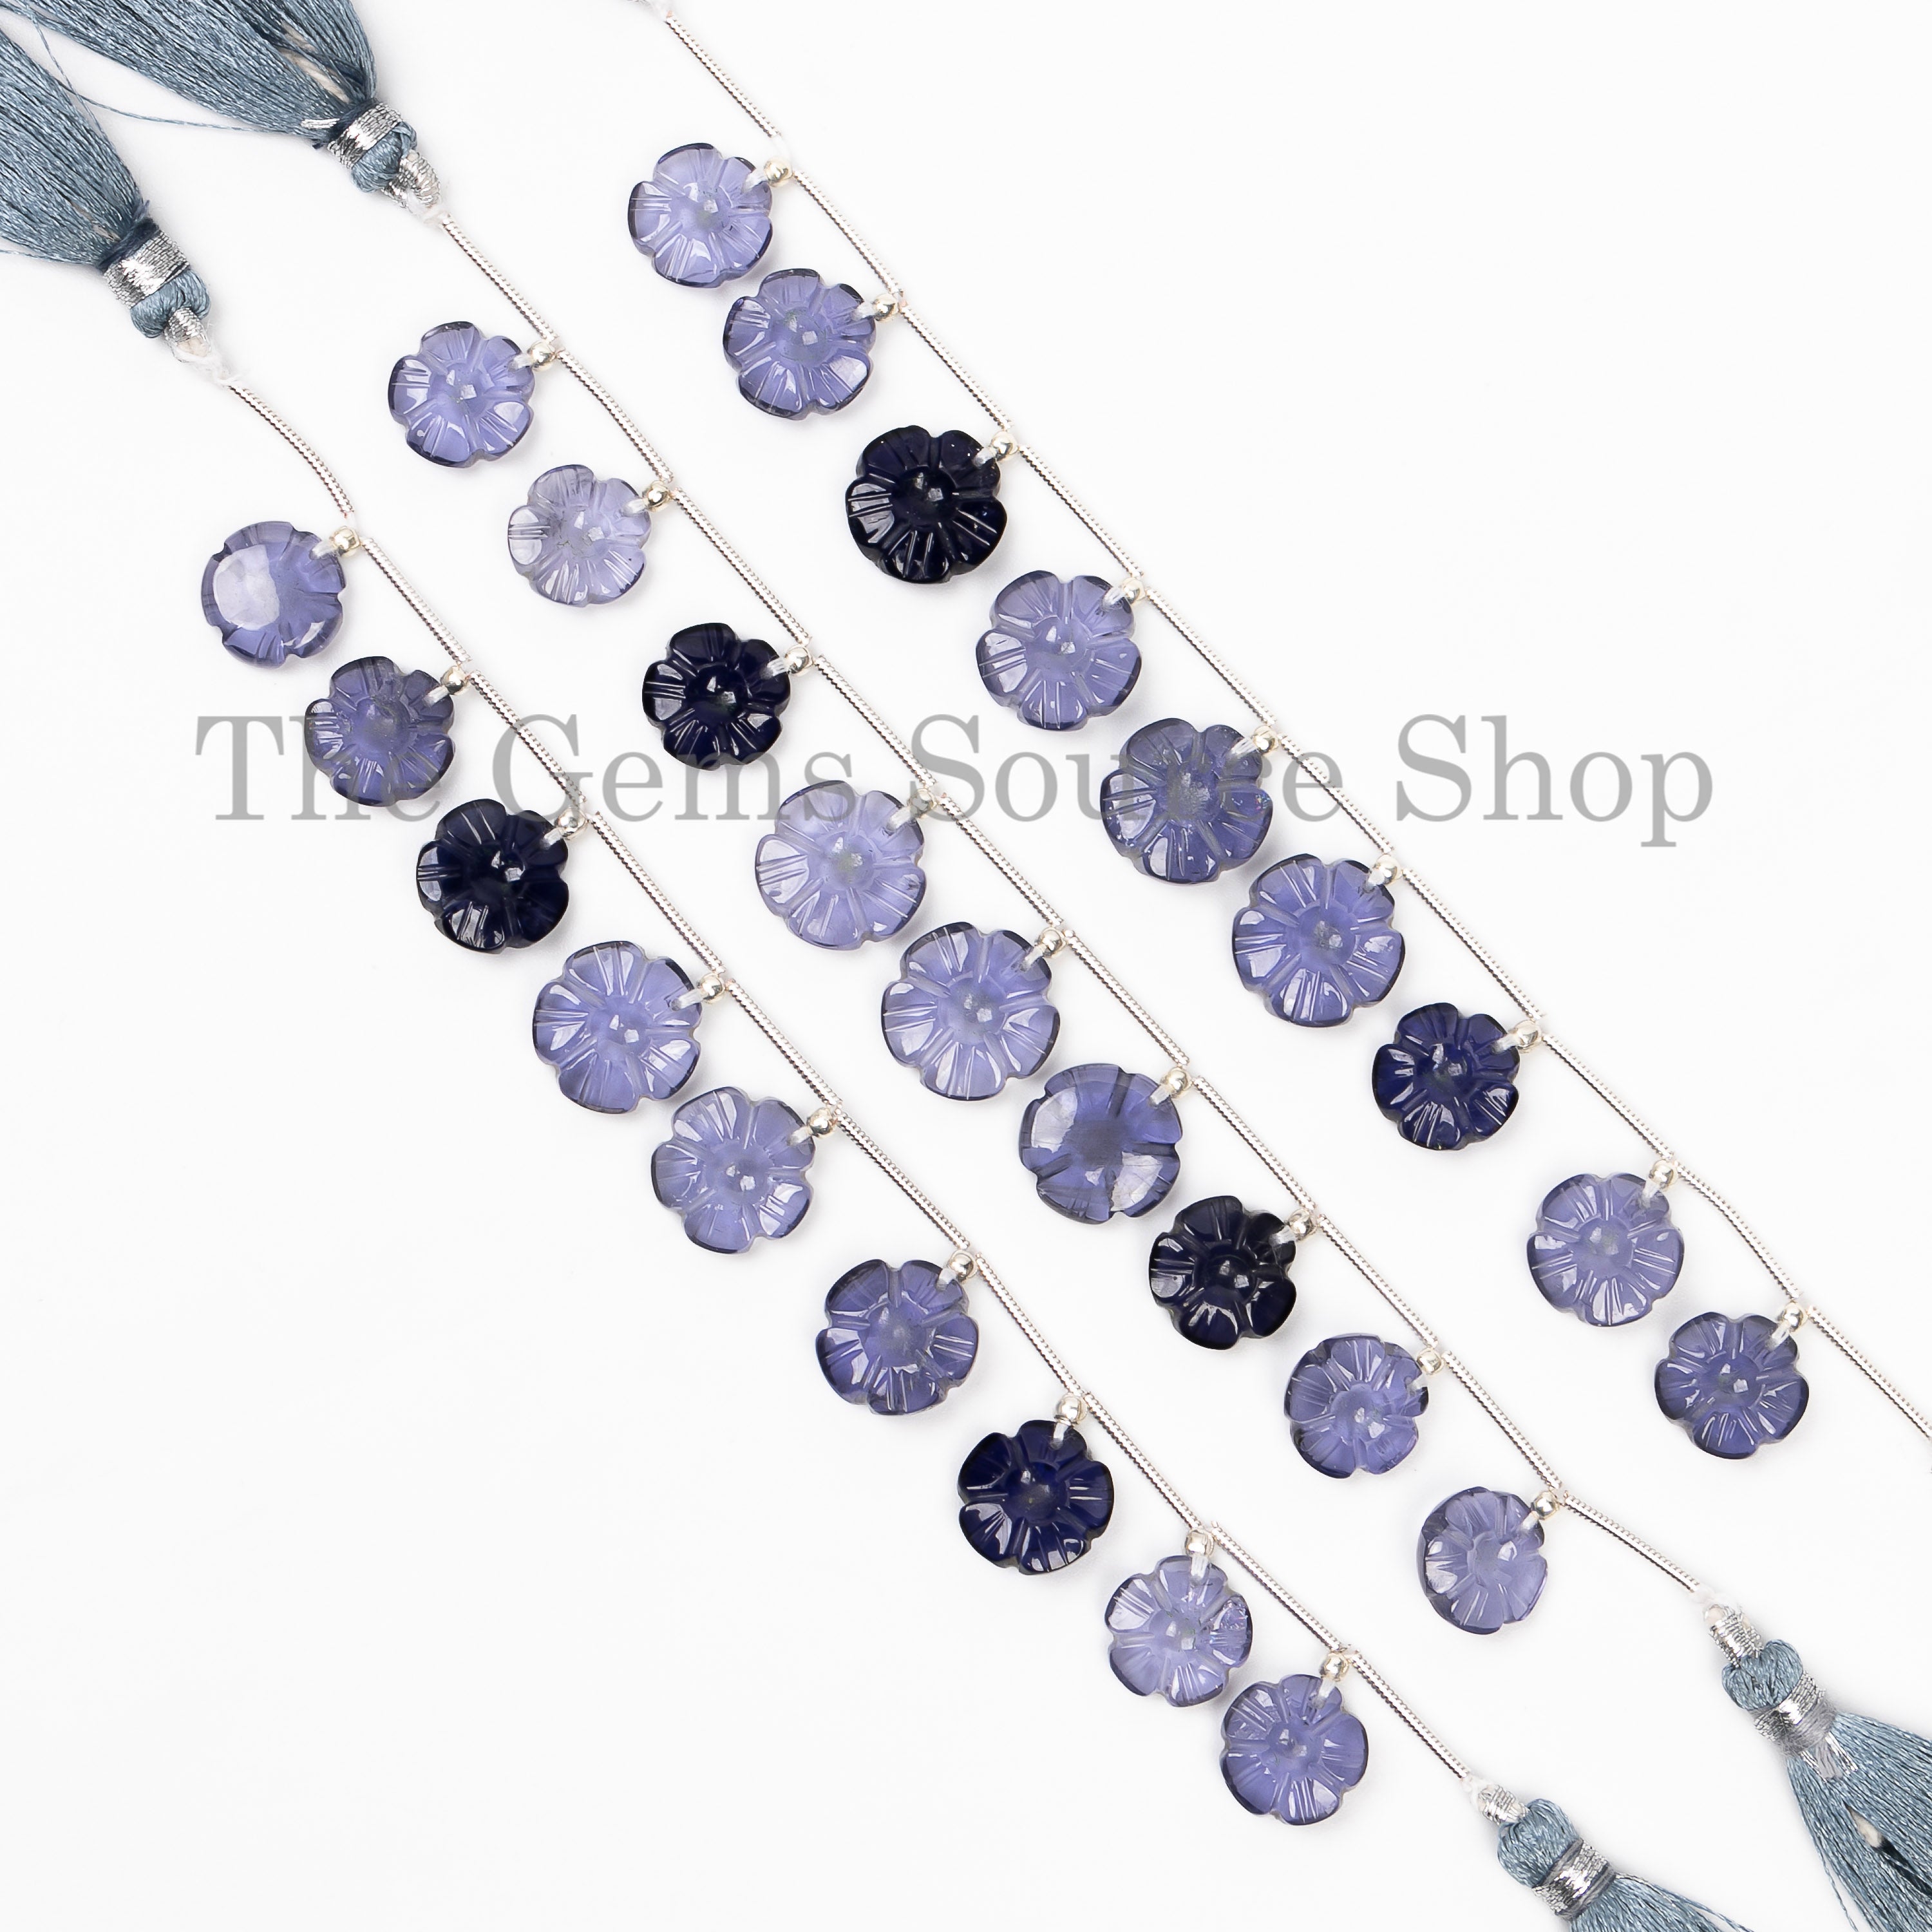 Extremely Rare Iolite Flower Carving Beads, 8-11mm Iolite Fancy Beads,Carving Beads, Iolite Beads